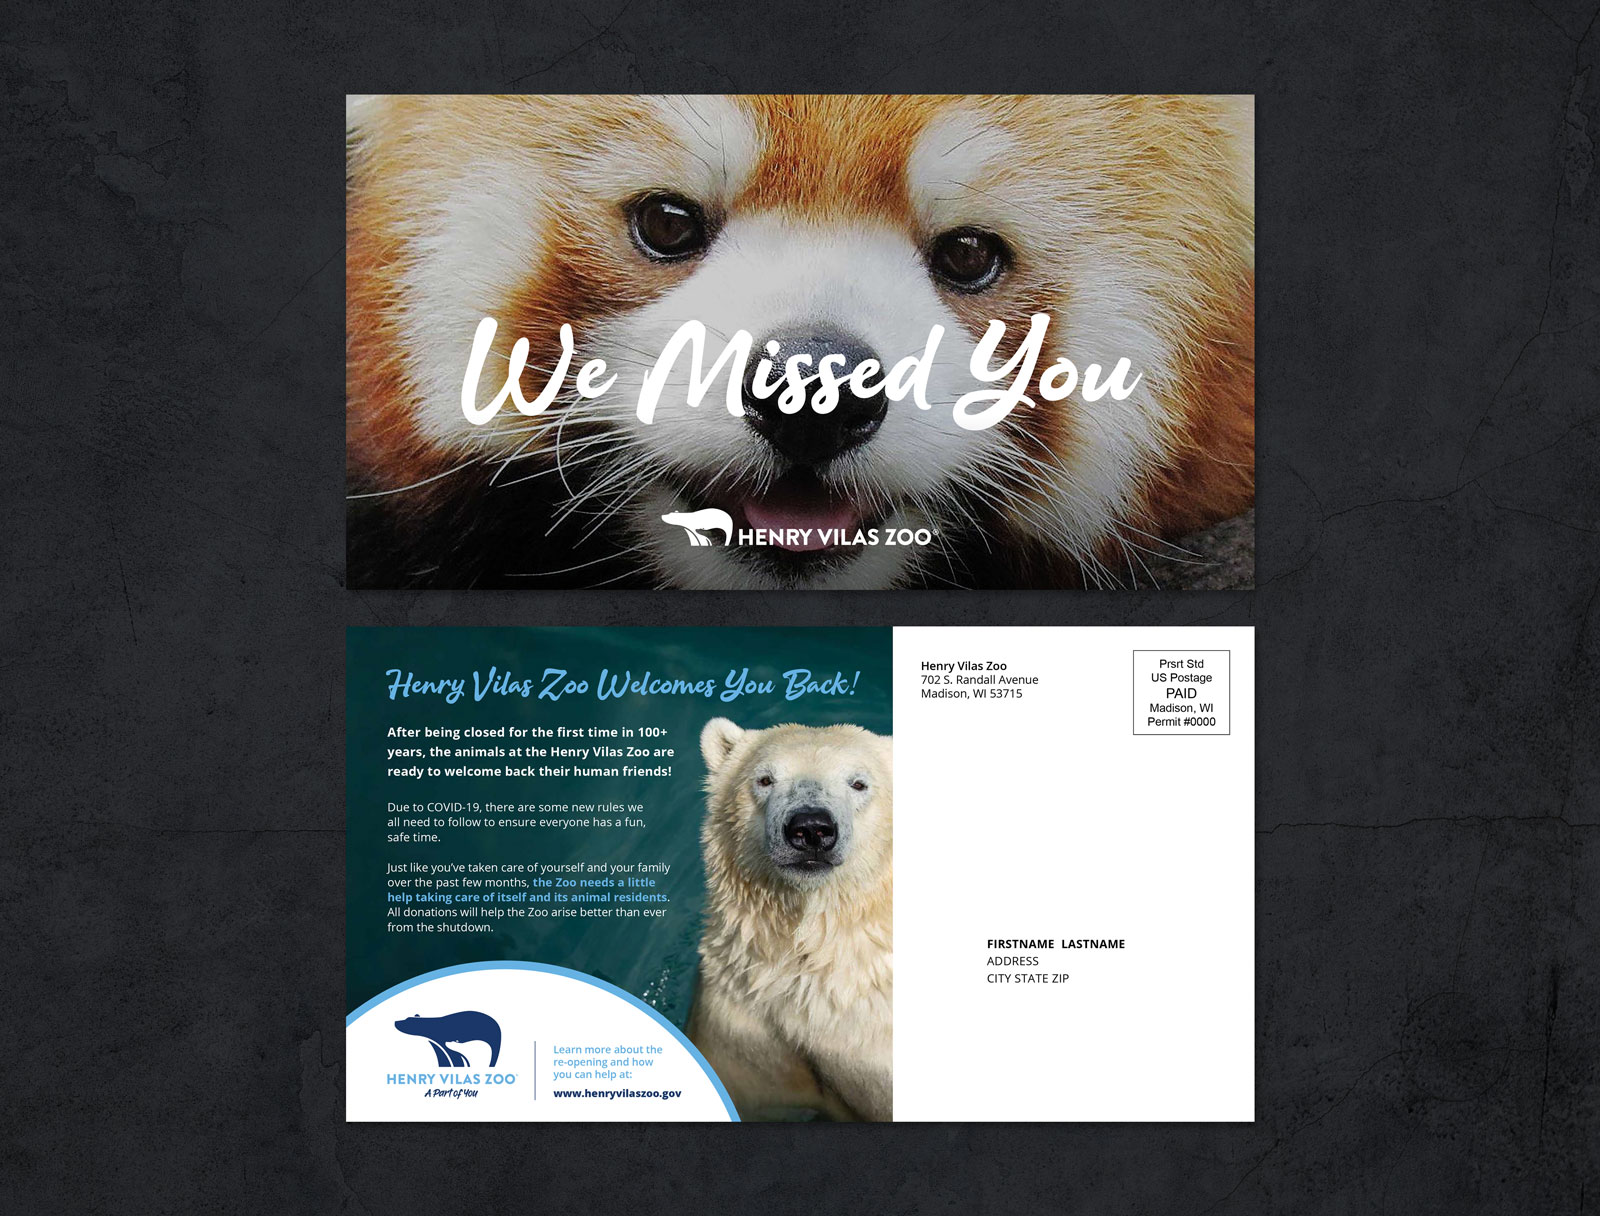 Henry Vilas Zoo Direct Mail